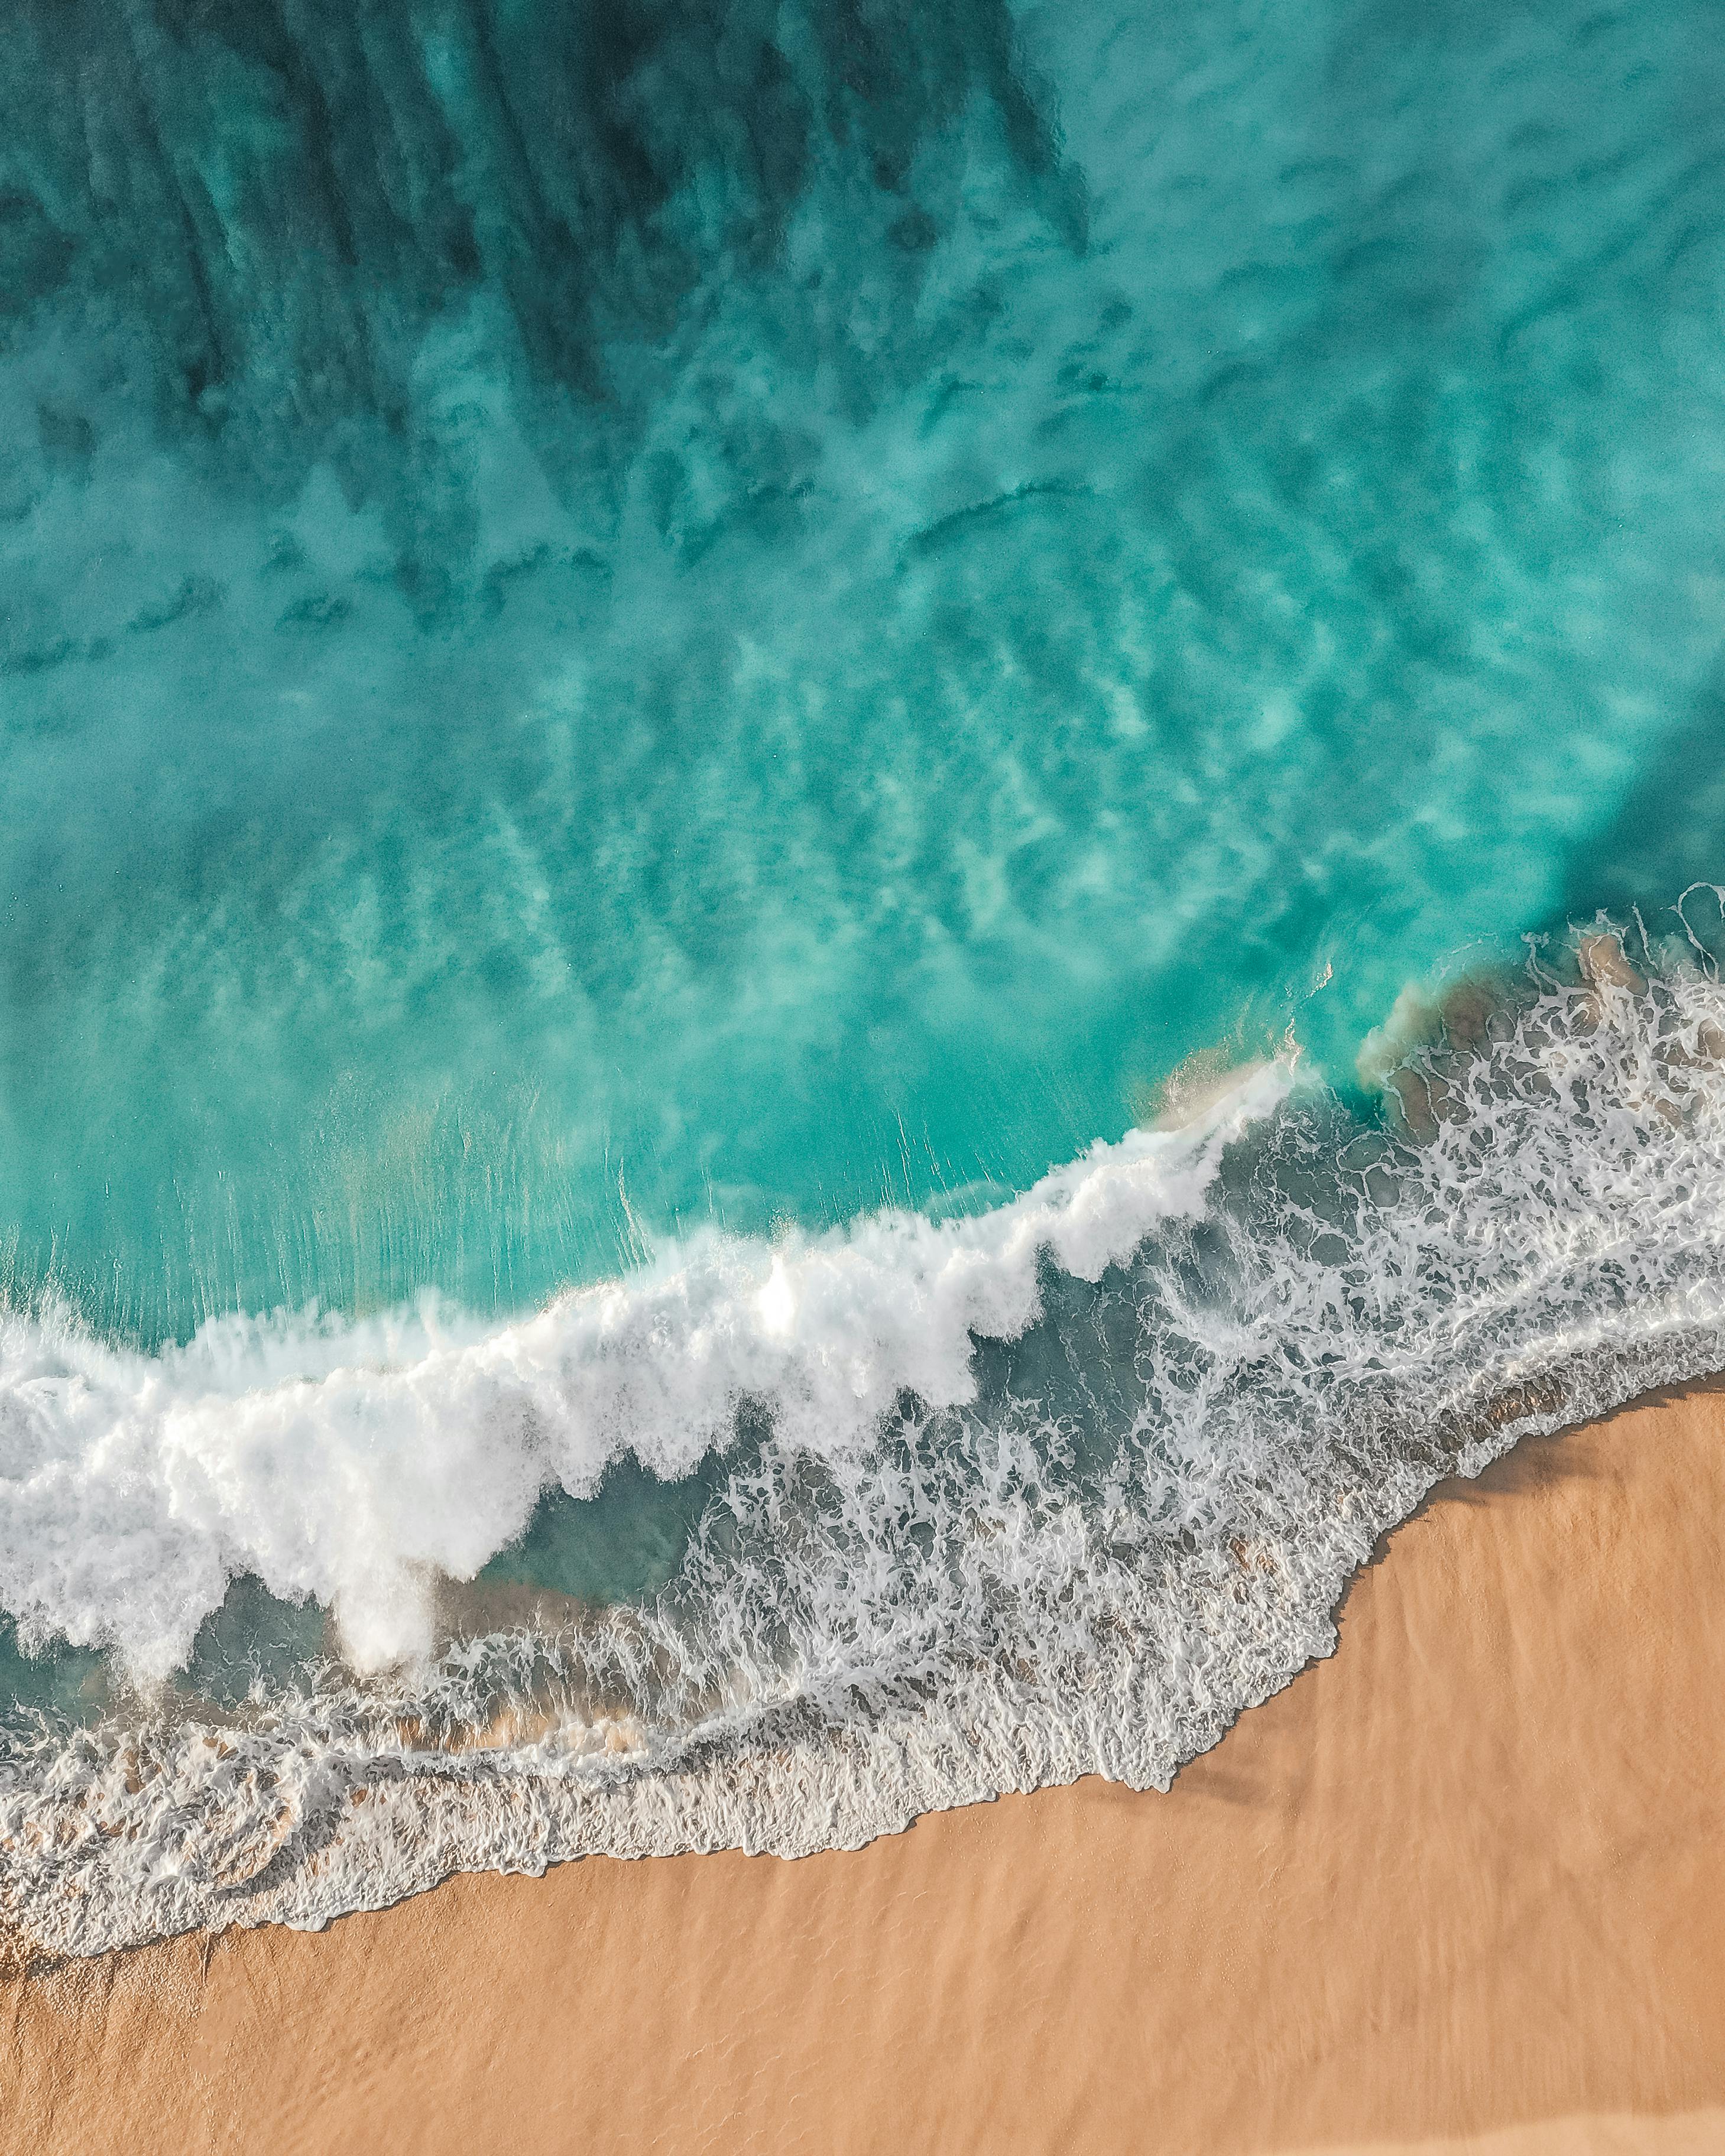 ocean waves from above